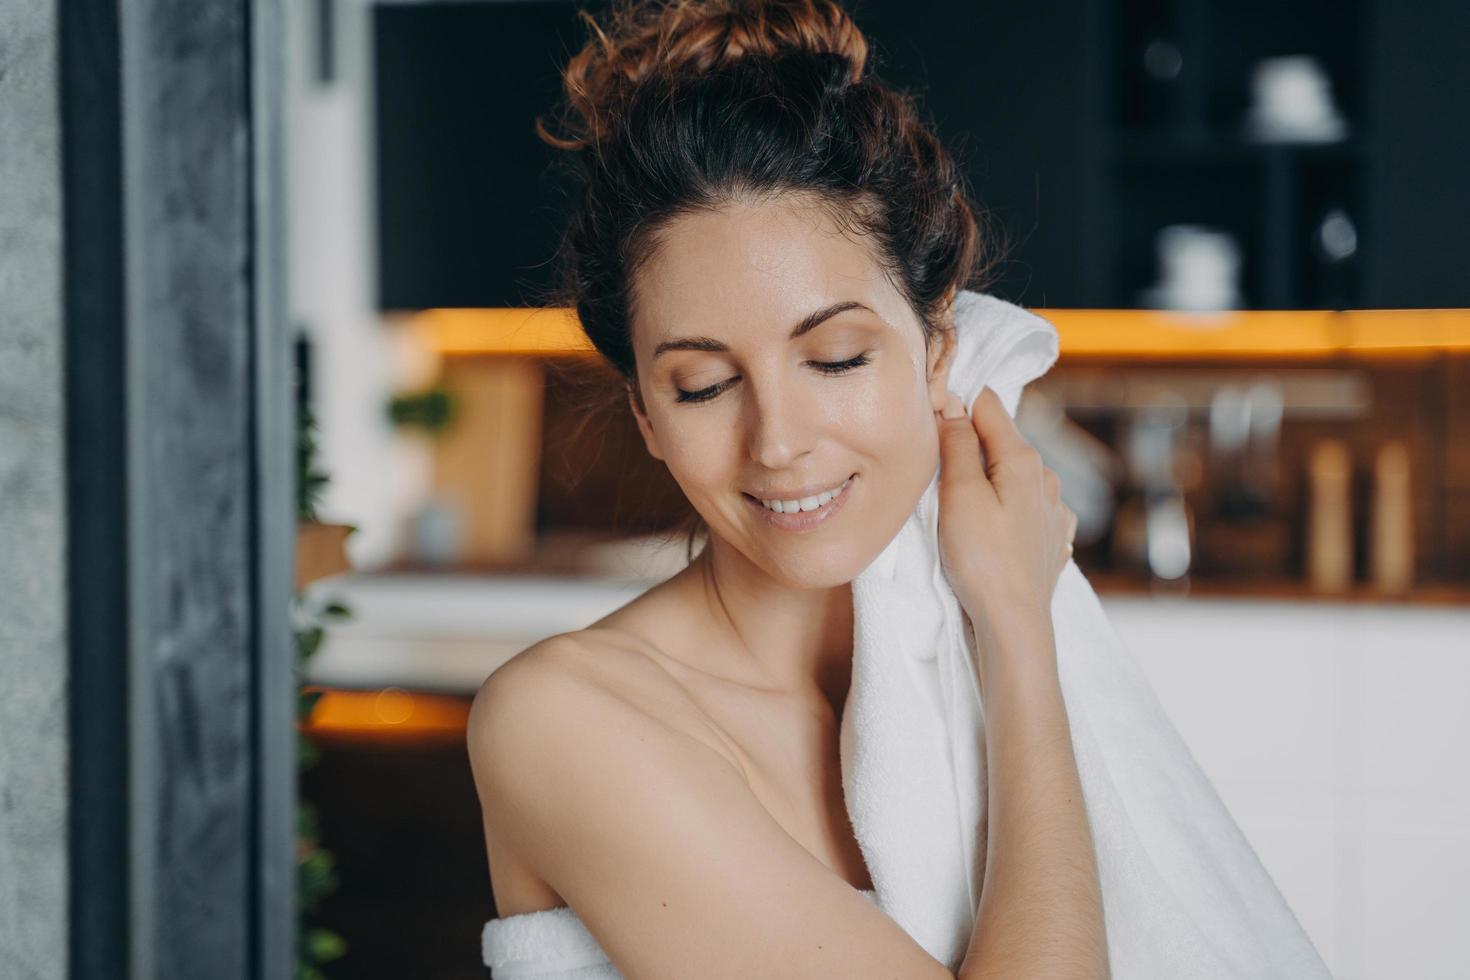 Young lady relaxing in bathroom, enjoying the bath and beauty routine. Girl wiping face with towel. photo